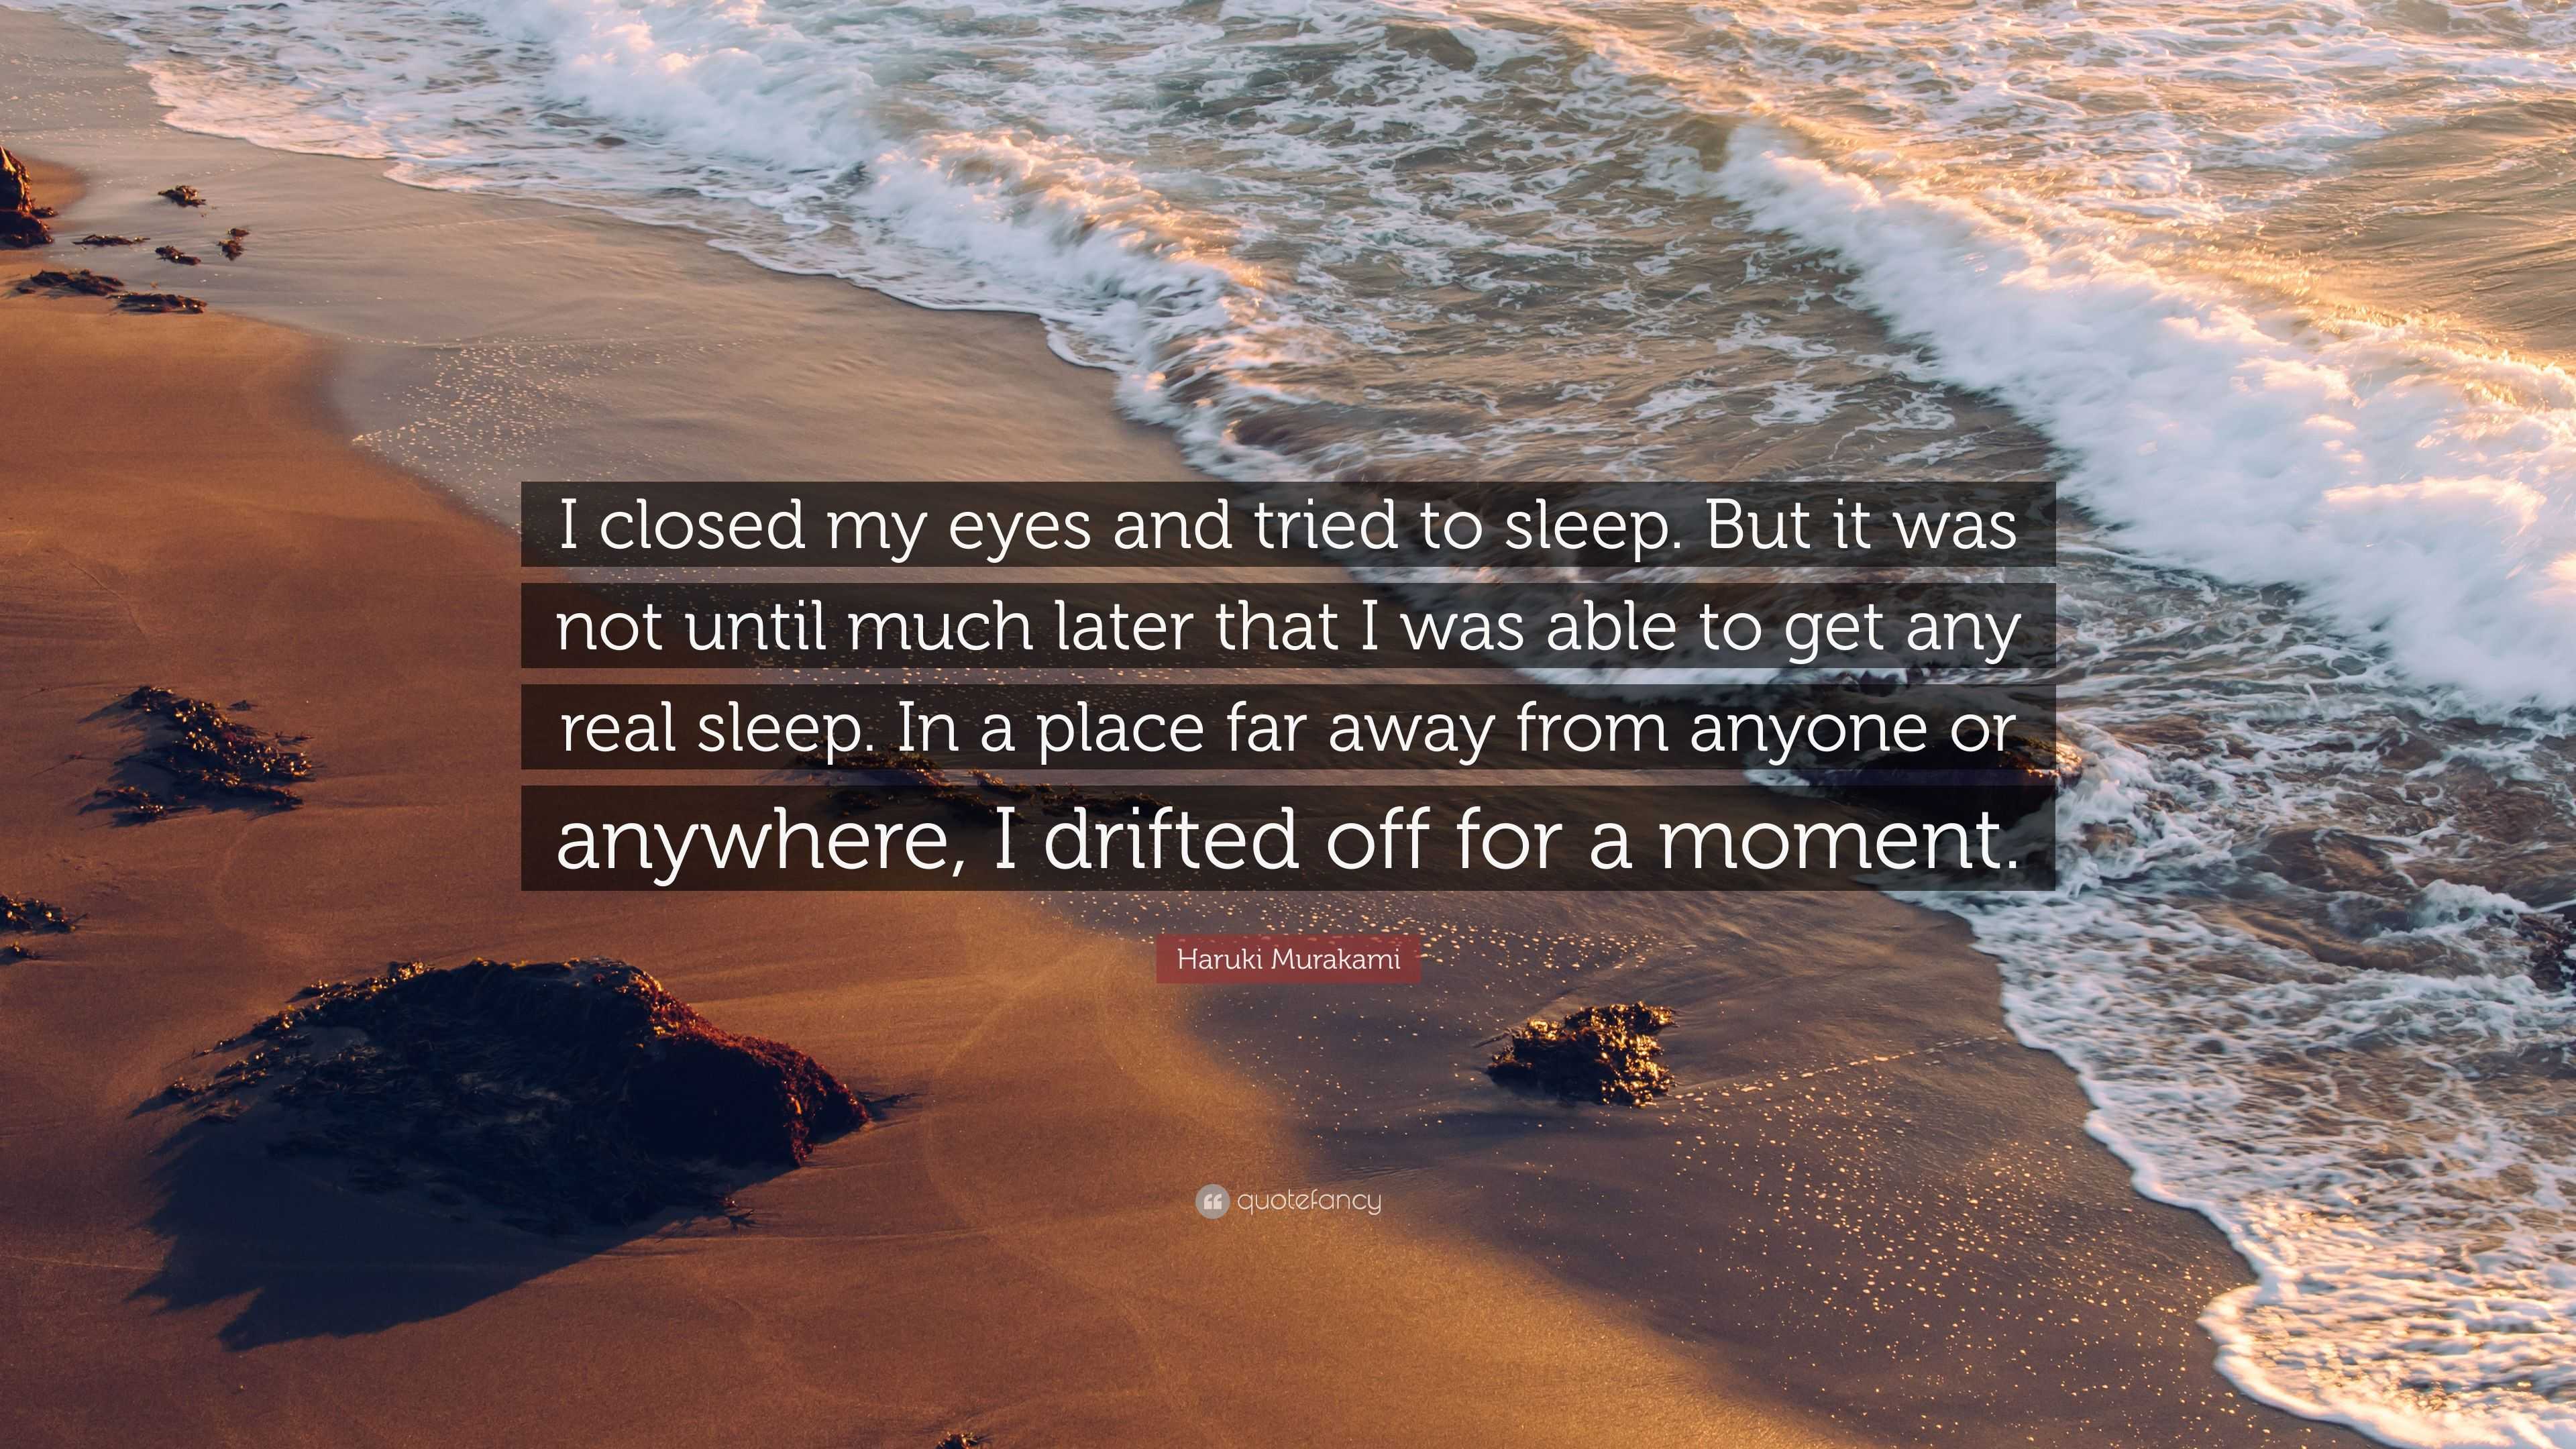 Haruki Murakami Quote “i Closed My Eyes And Tried To Sleep But It Was